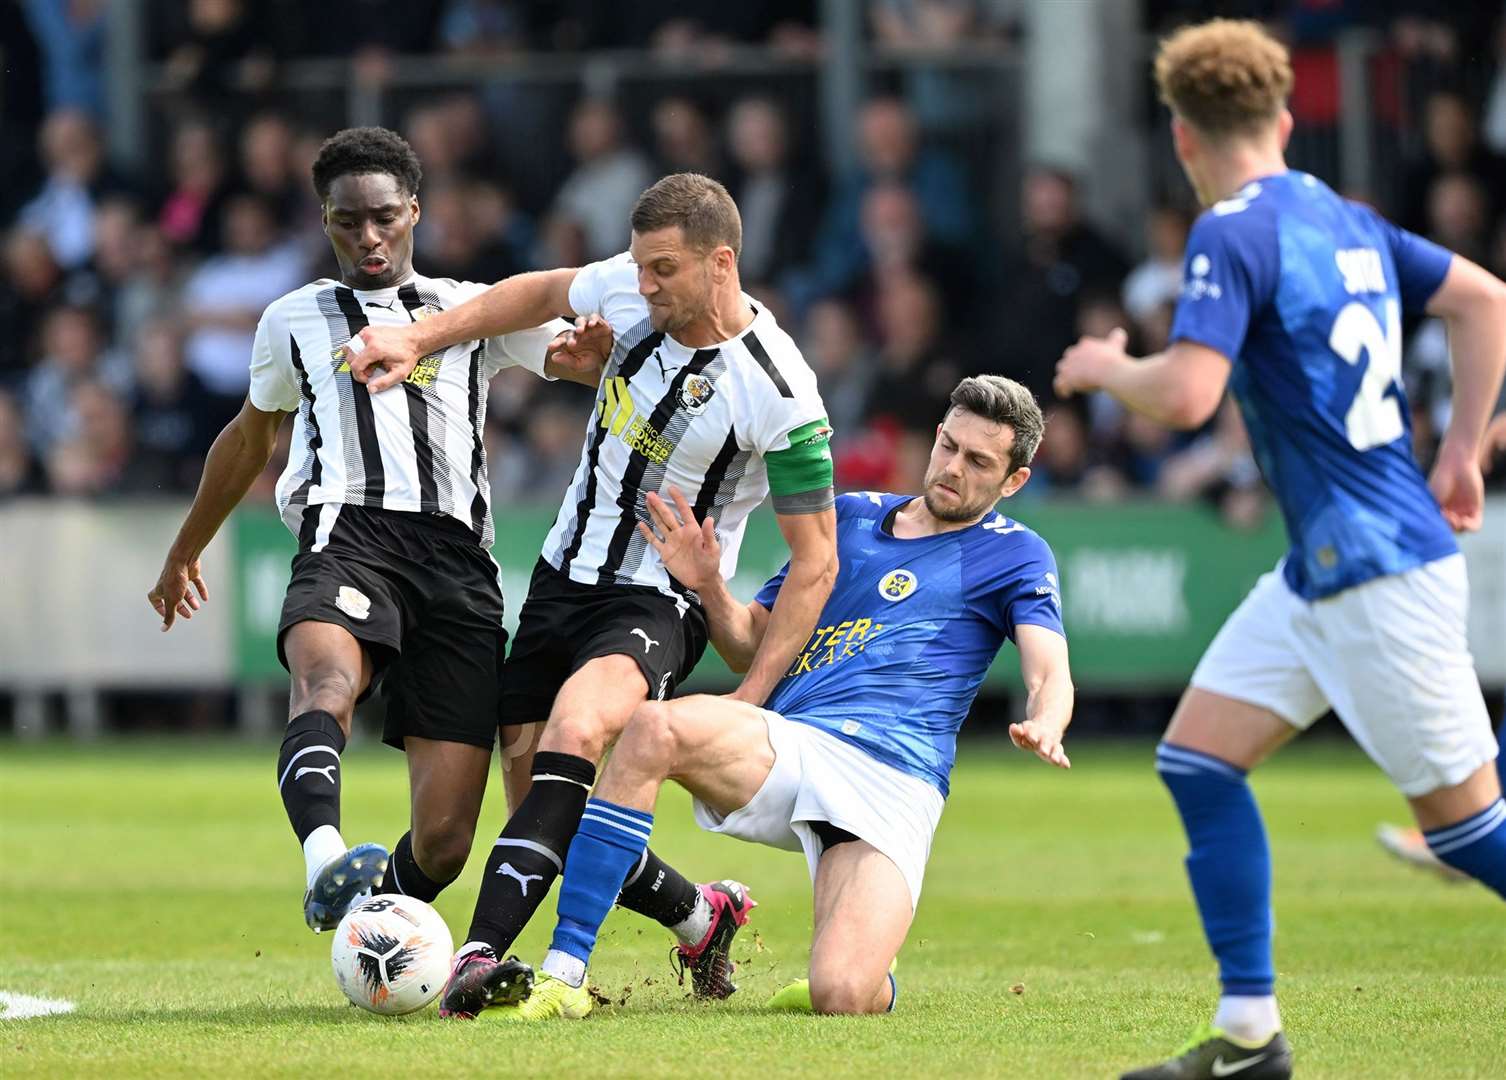 Captain Tom Bonner wins the ball for Dartford during Sunday’s play-off clash. Picture: Keith Gillard